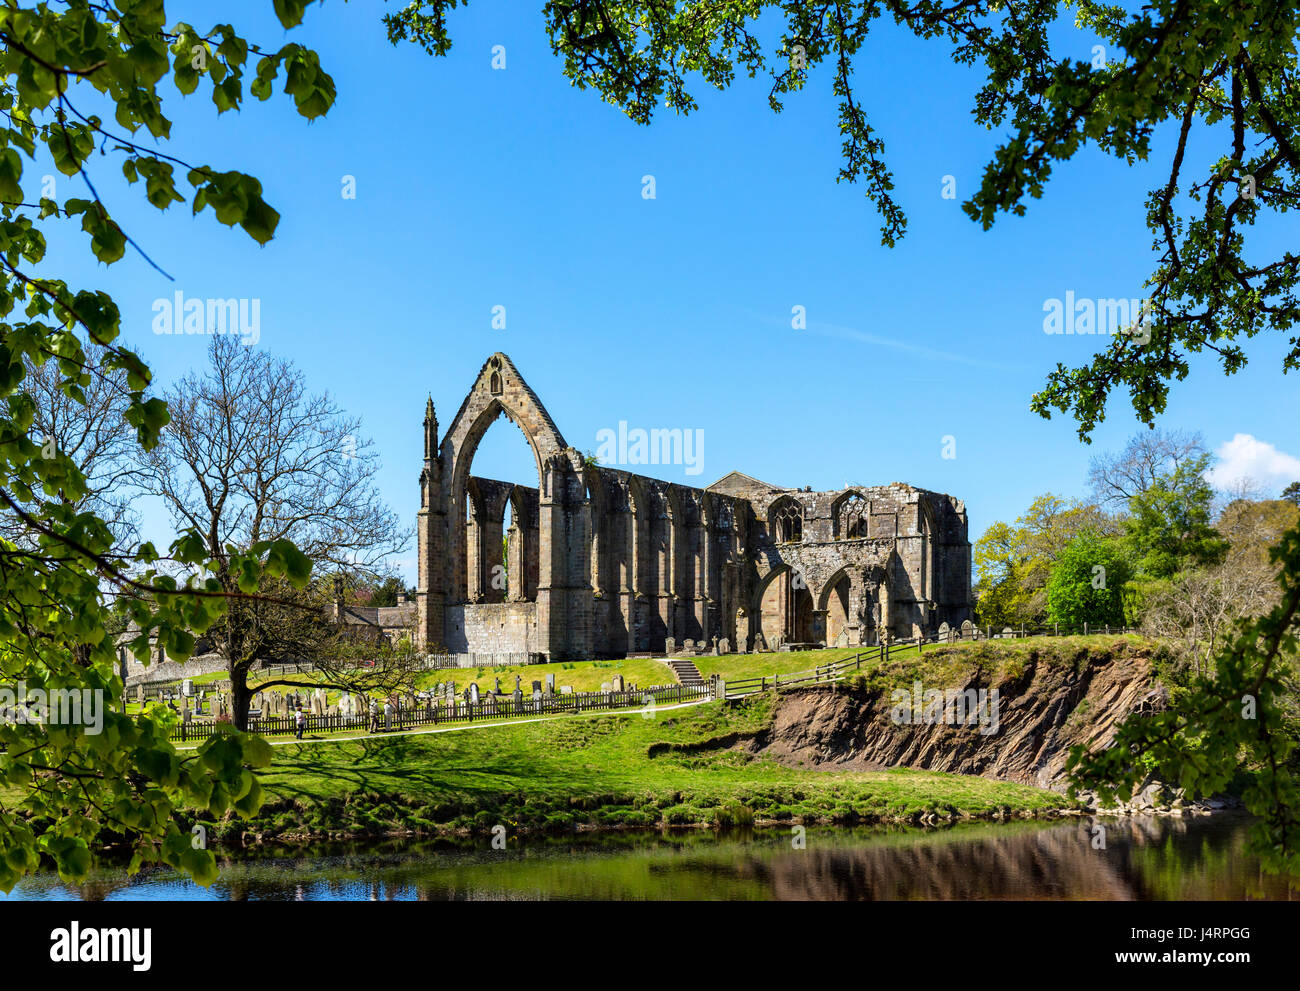 Bolton Priory, Bolton Abbey, Wharfedale, Yorkshire Dales National Park, North Yorkshire, England, UK Stock Photo